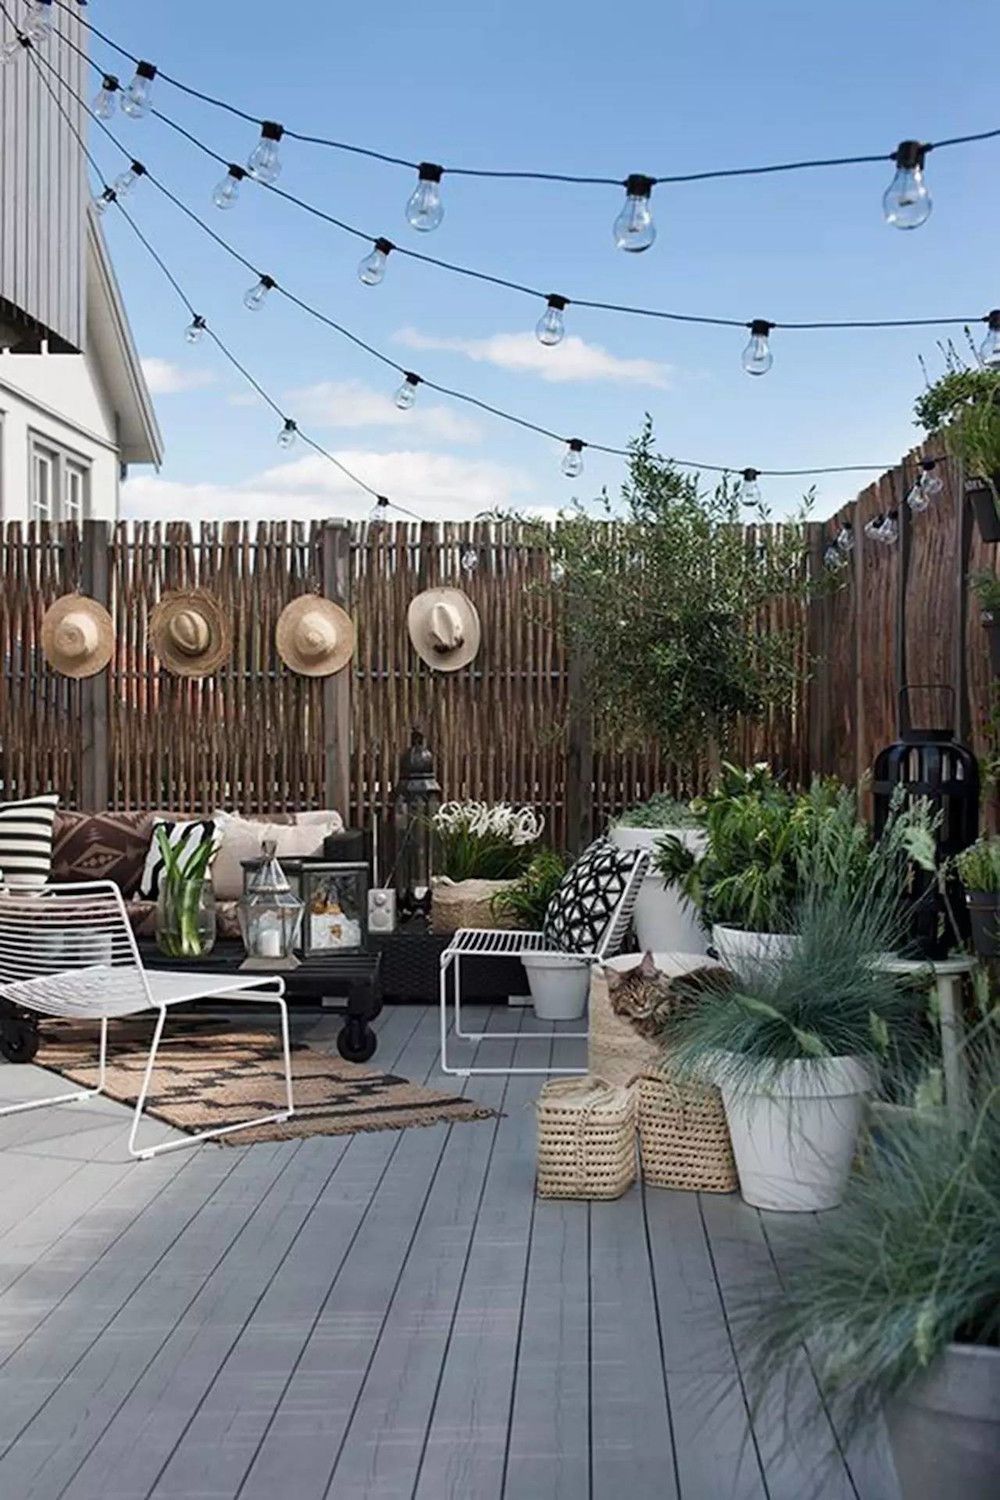 Outdoor Patio – String Lights – Backyard Ideas | Hanging Hats With Regard To Hanging Outdoor Lights On Fence (View 9 of 15)